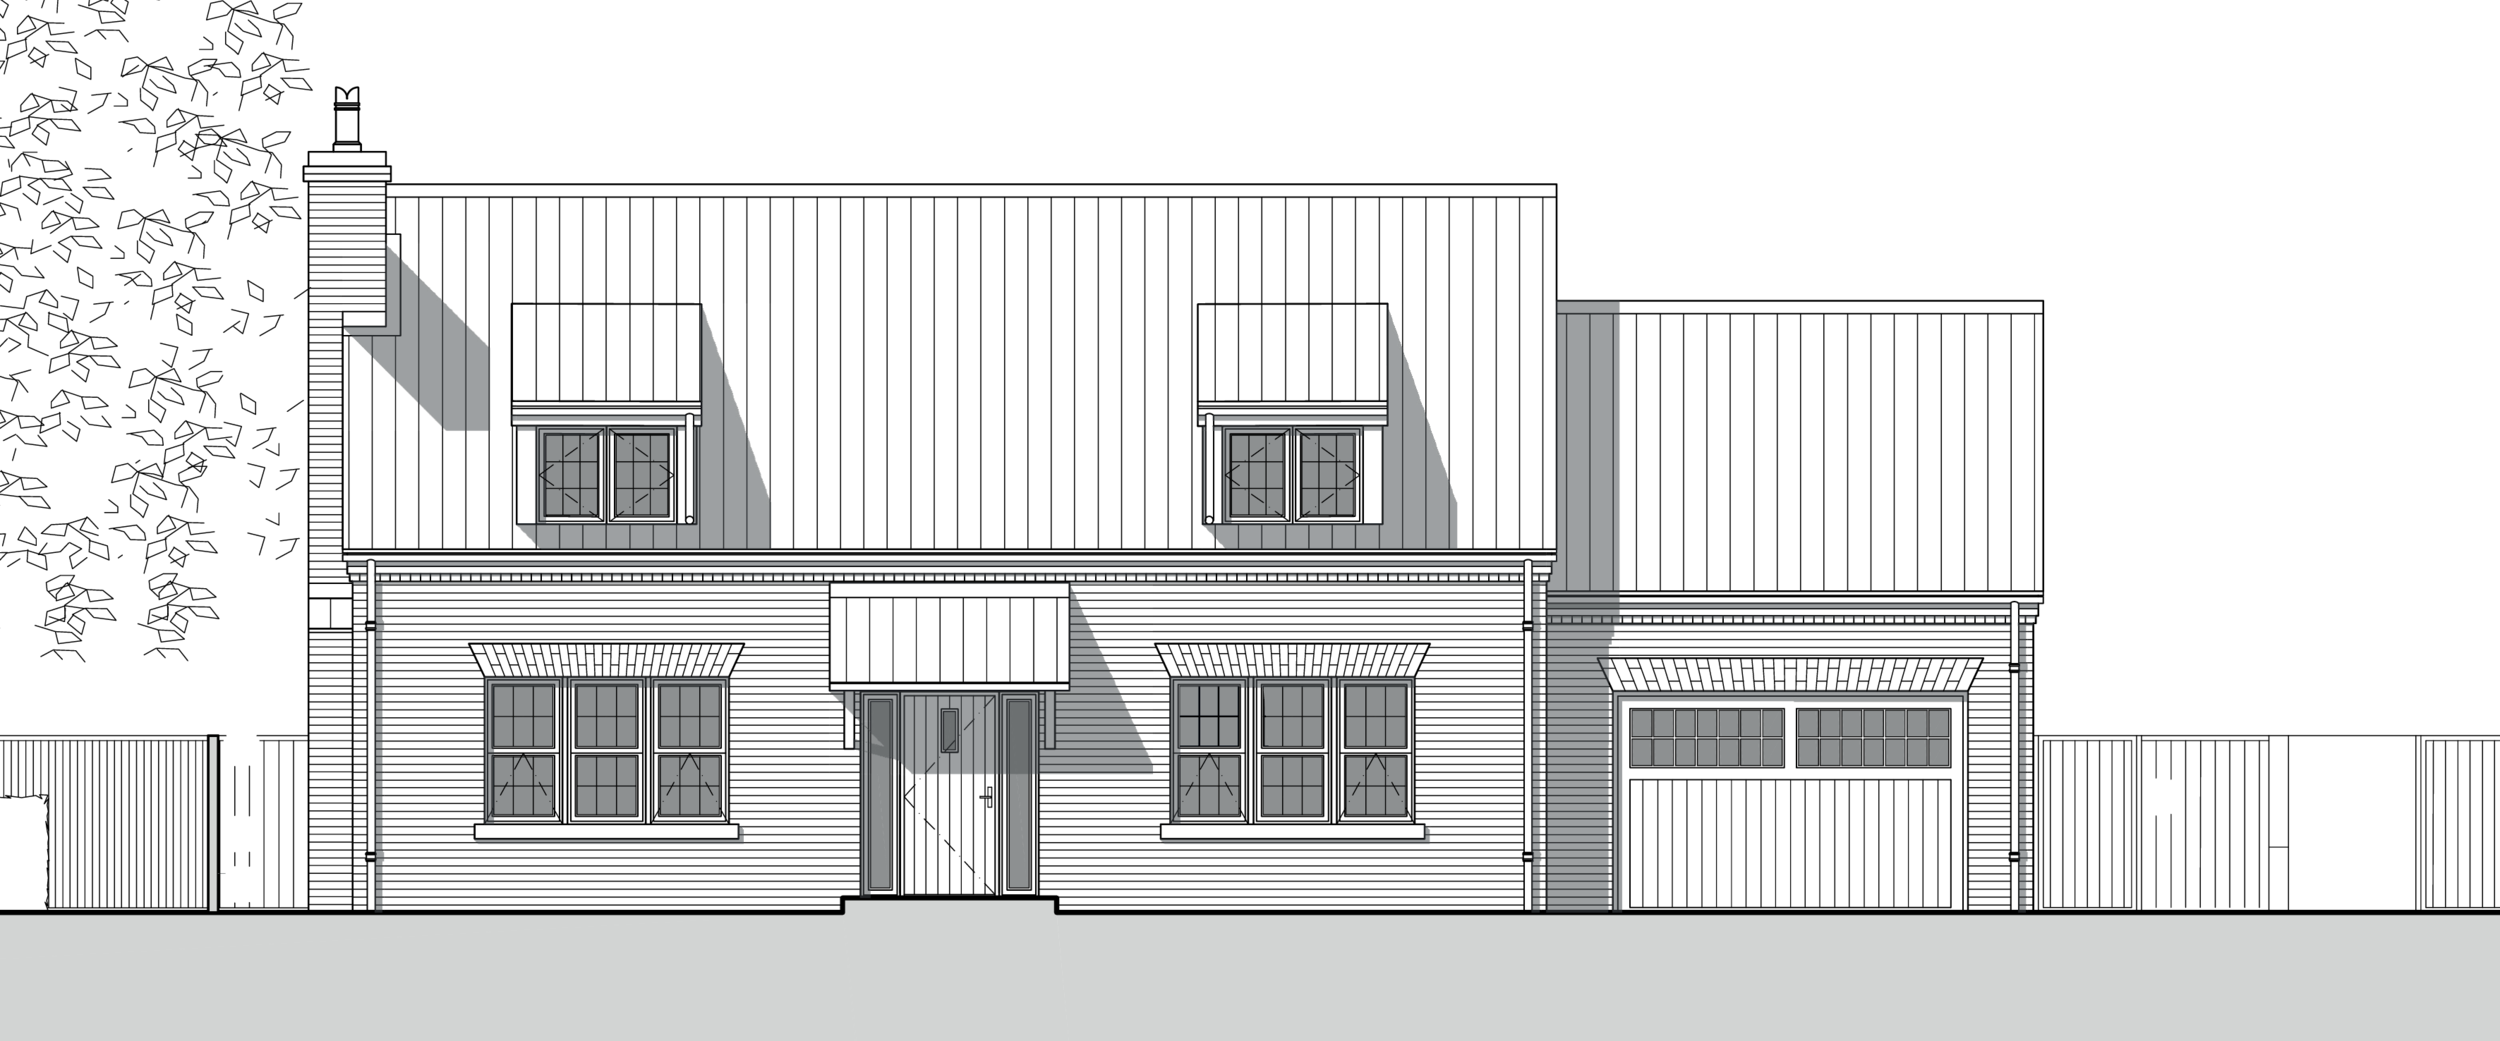 tockwith_elevations_york_house.png